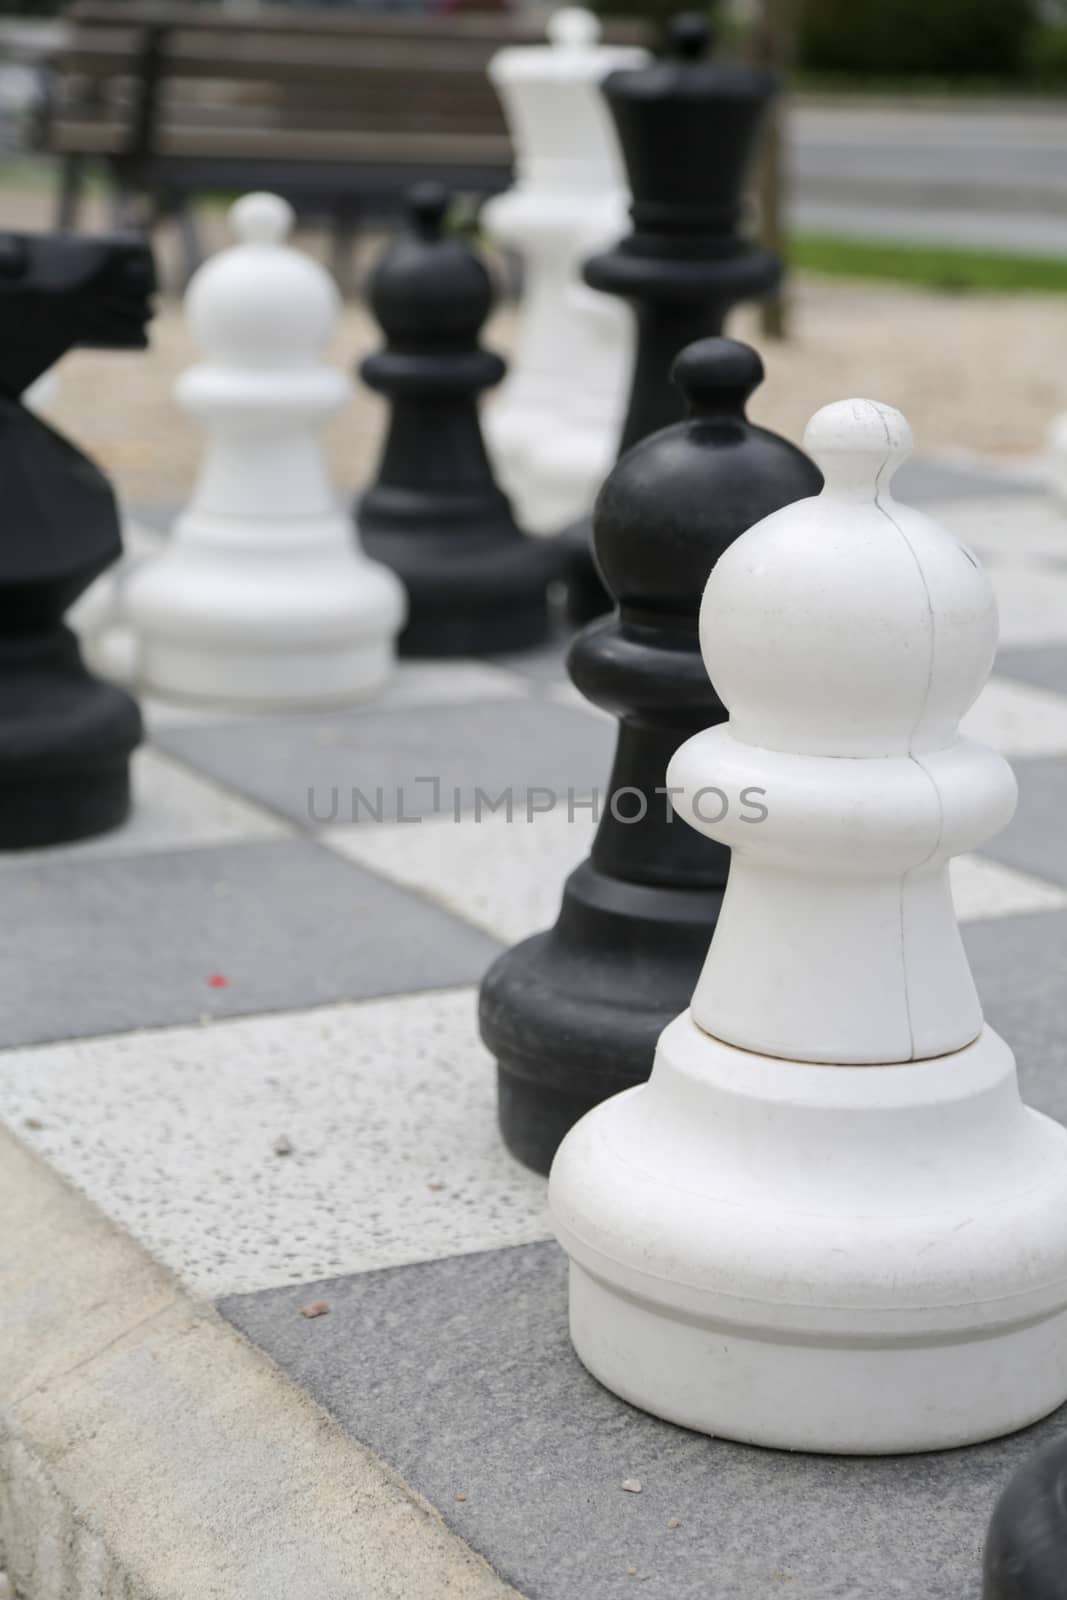 Black and white king on a chess board in open air